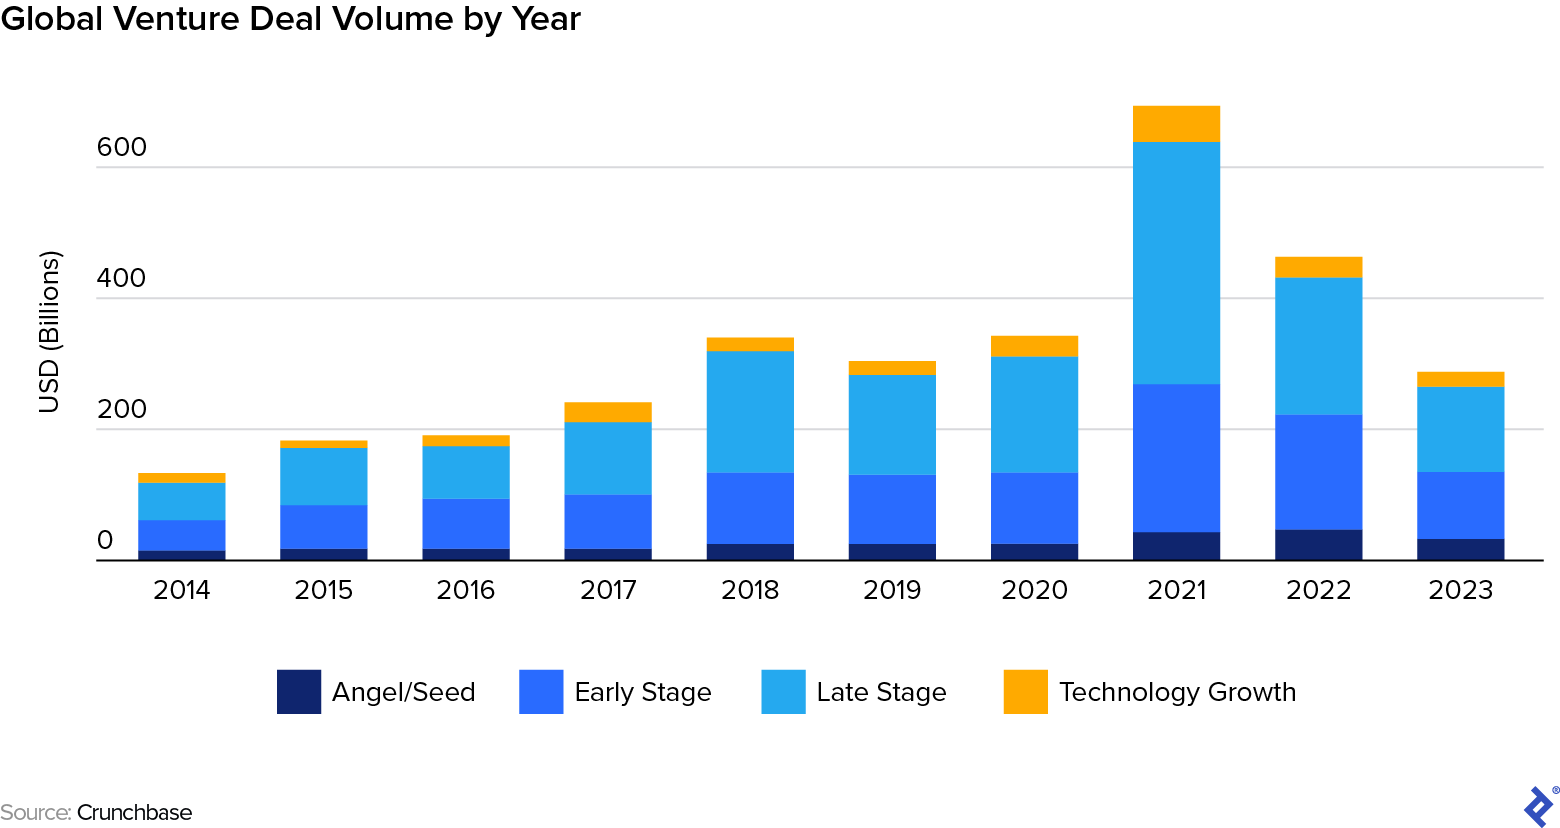 A bar chart shows global venture deal dollar volume rising from about $150 billion in 2014 and peaking at more than $600 billion in 2021; 2023 was just under $300 billion, similar to 2019. The chart is broken into angel/seed, early stage, late stage, and technology growth.